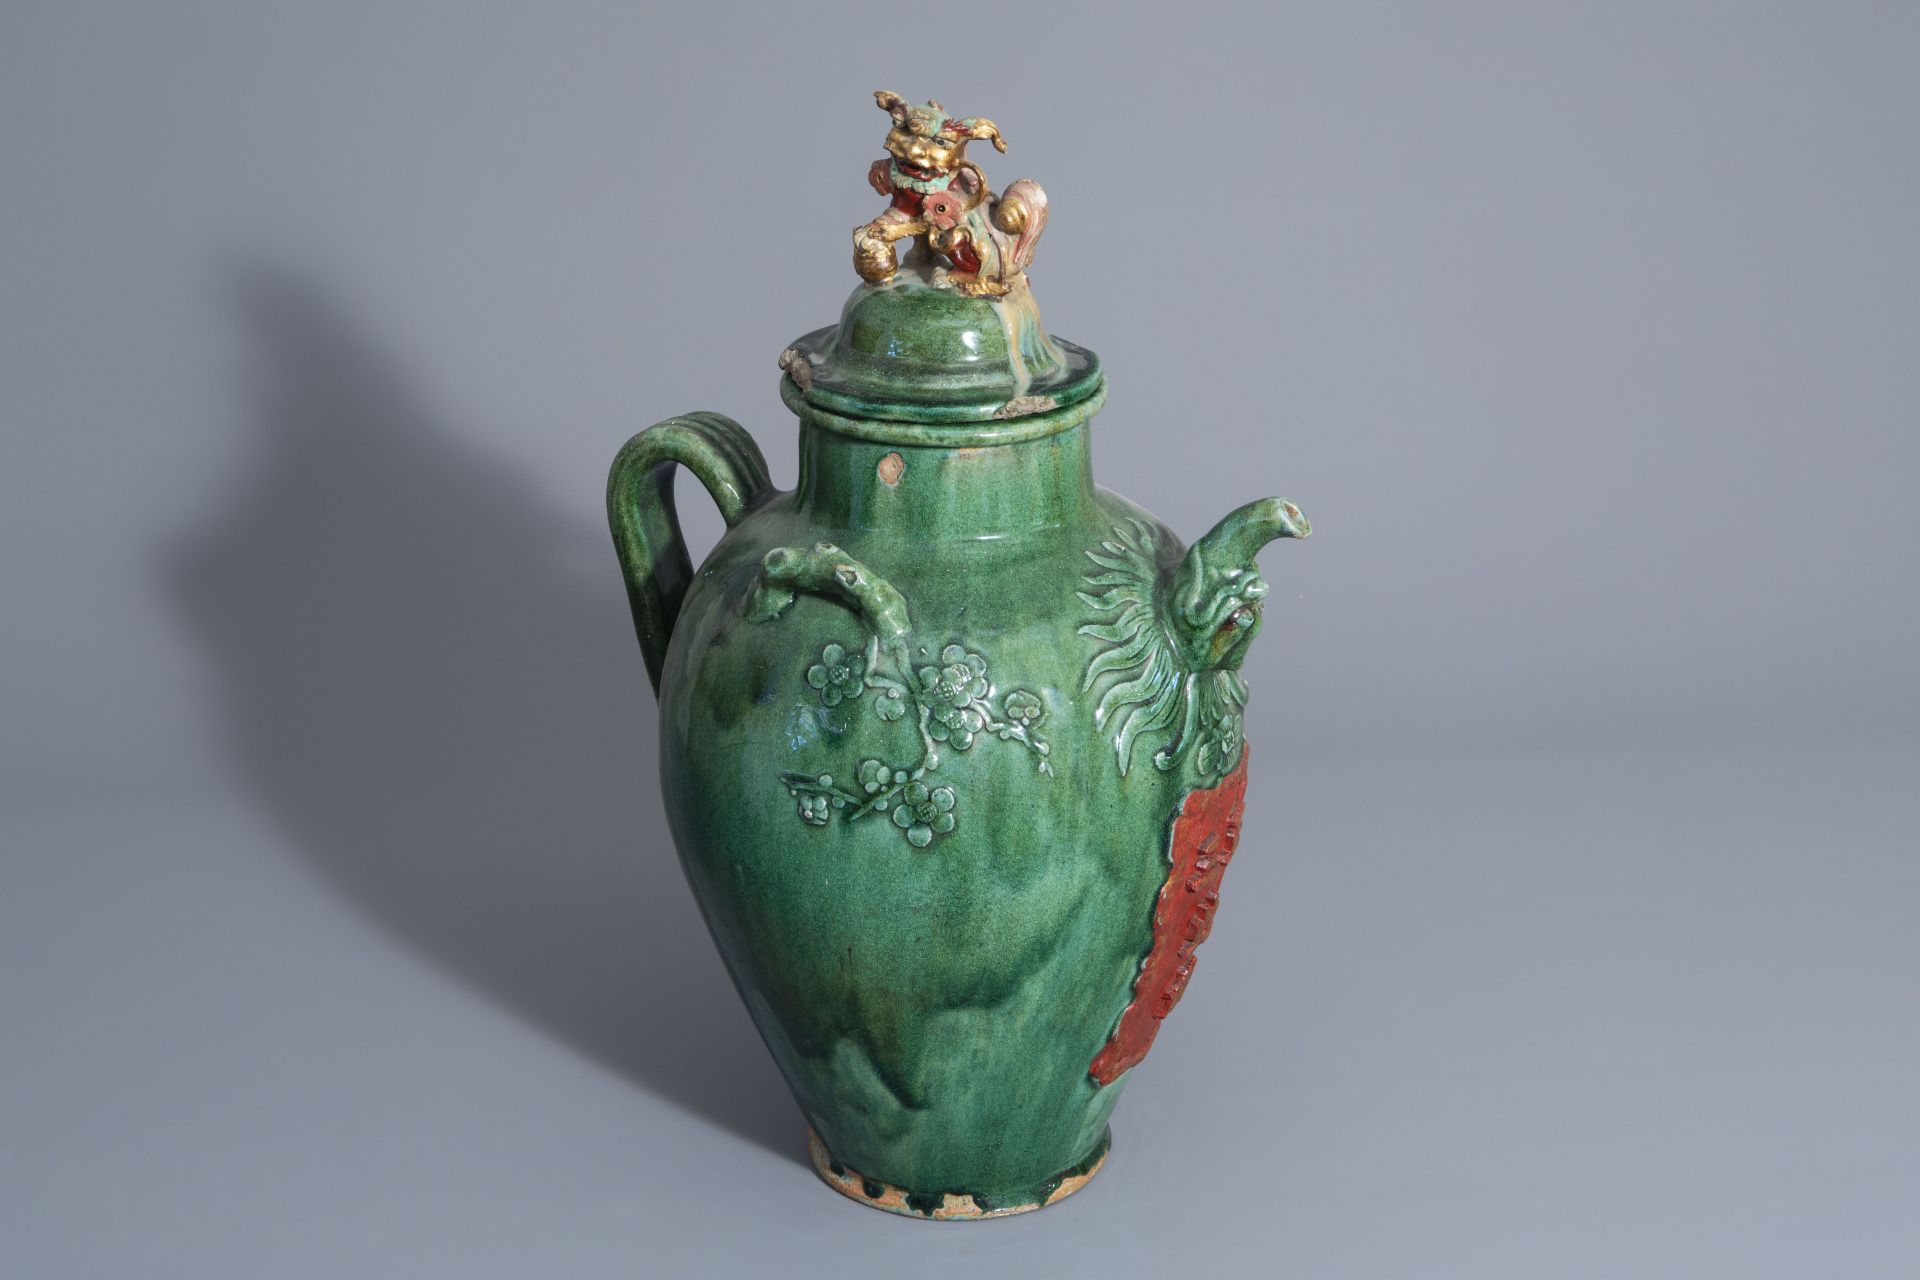 A large Chinese green glazed jug/jar with inscription, early 20th C.